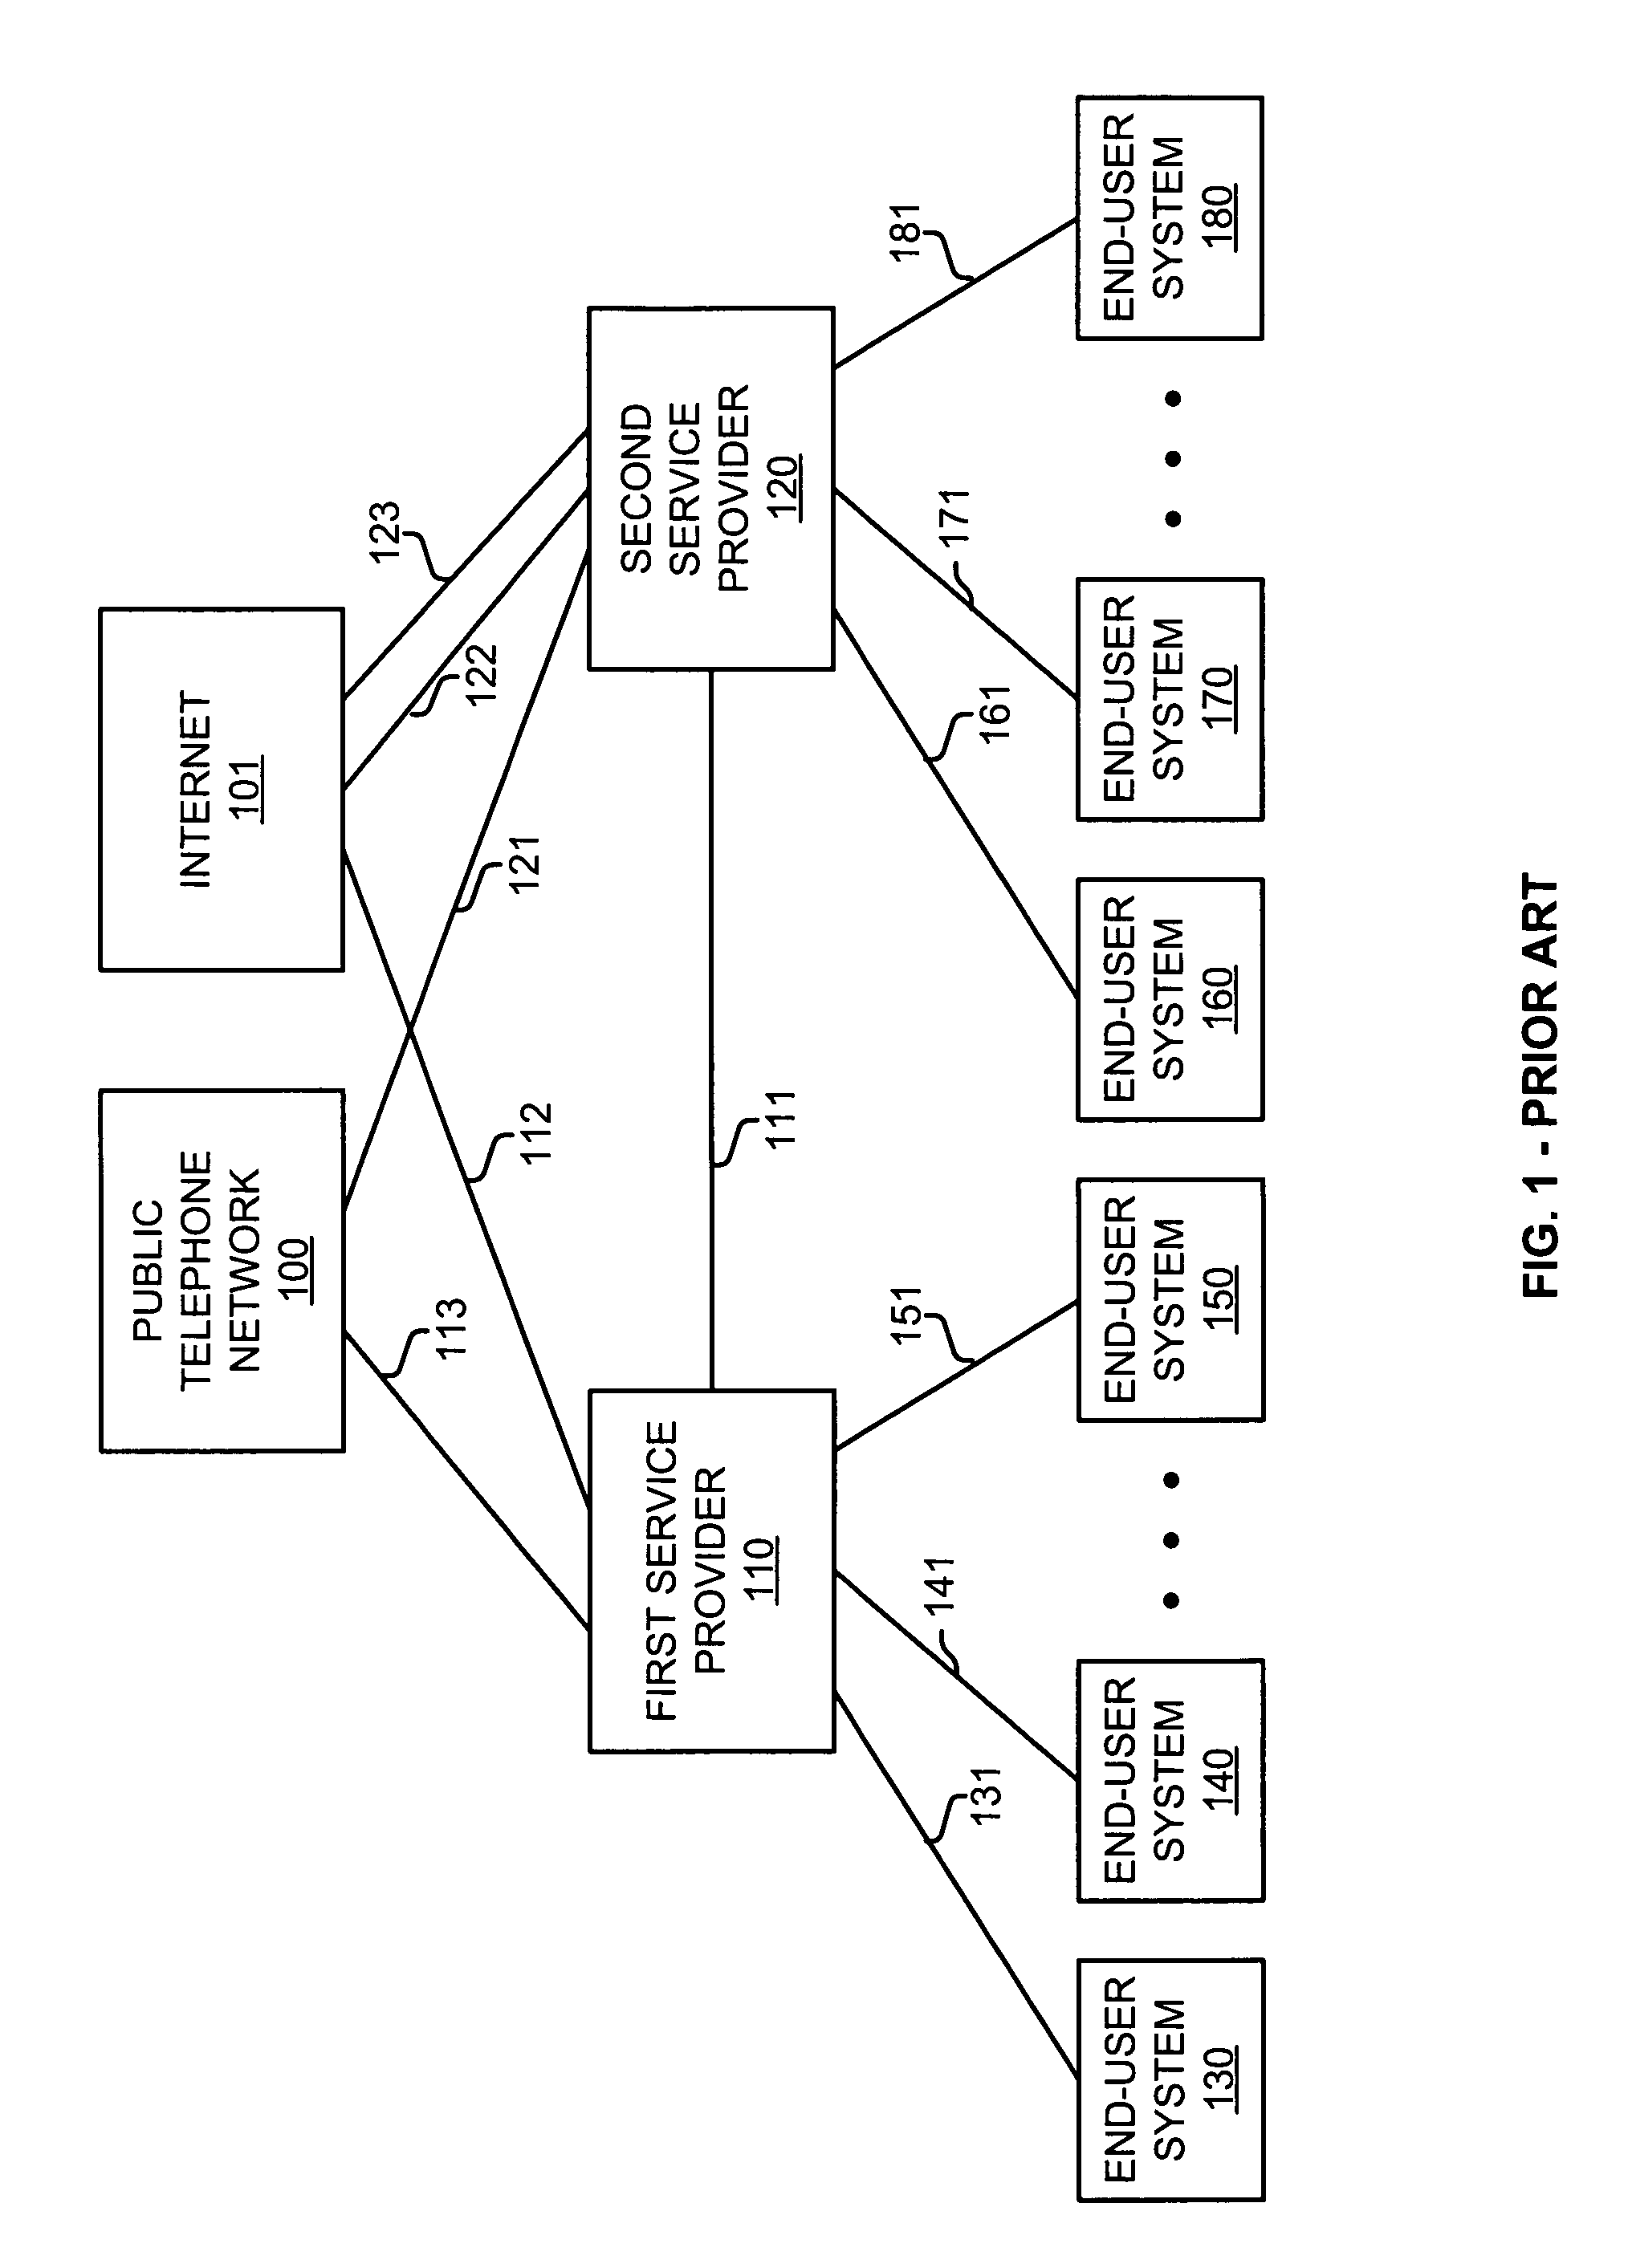 End-user systems for communication services over peer-to-peer internet protocol connections between service providers